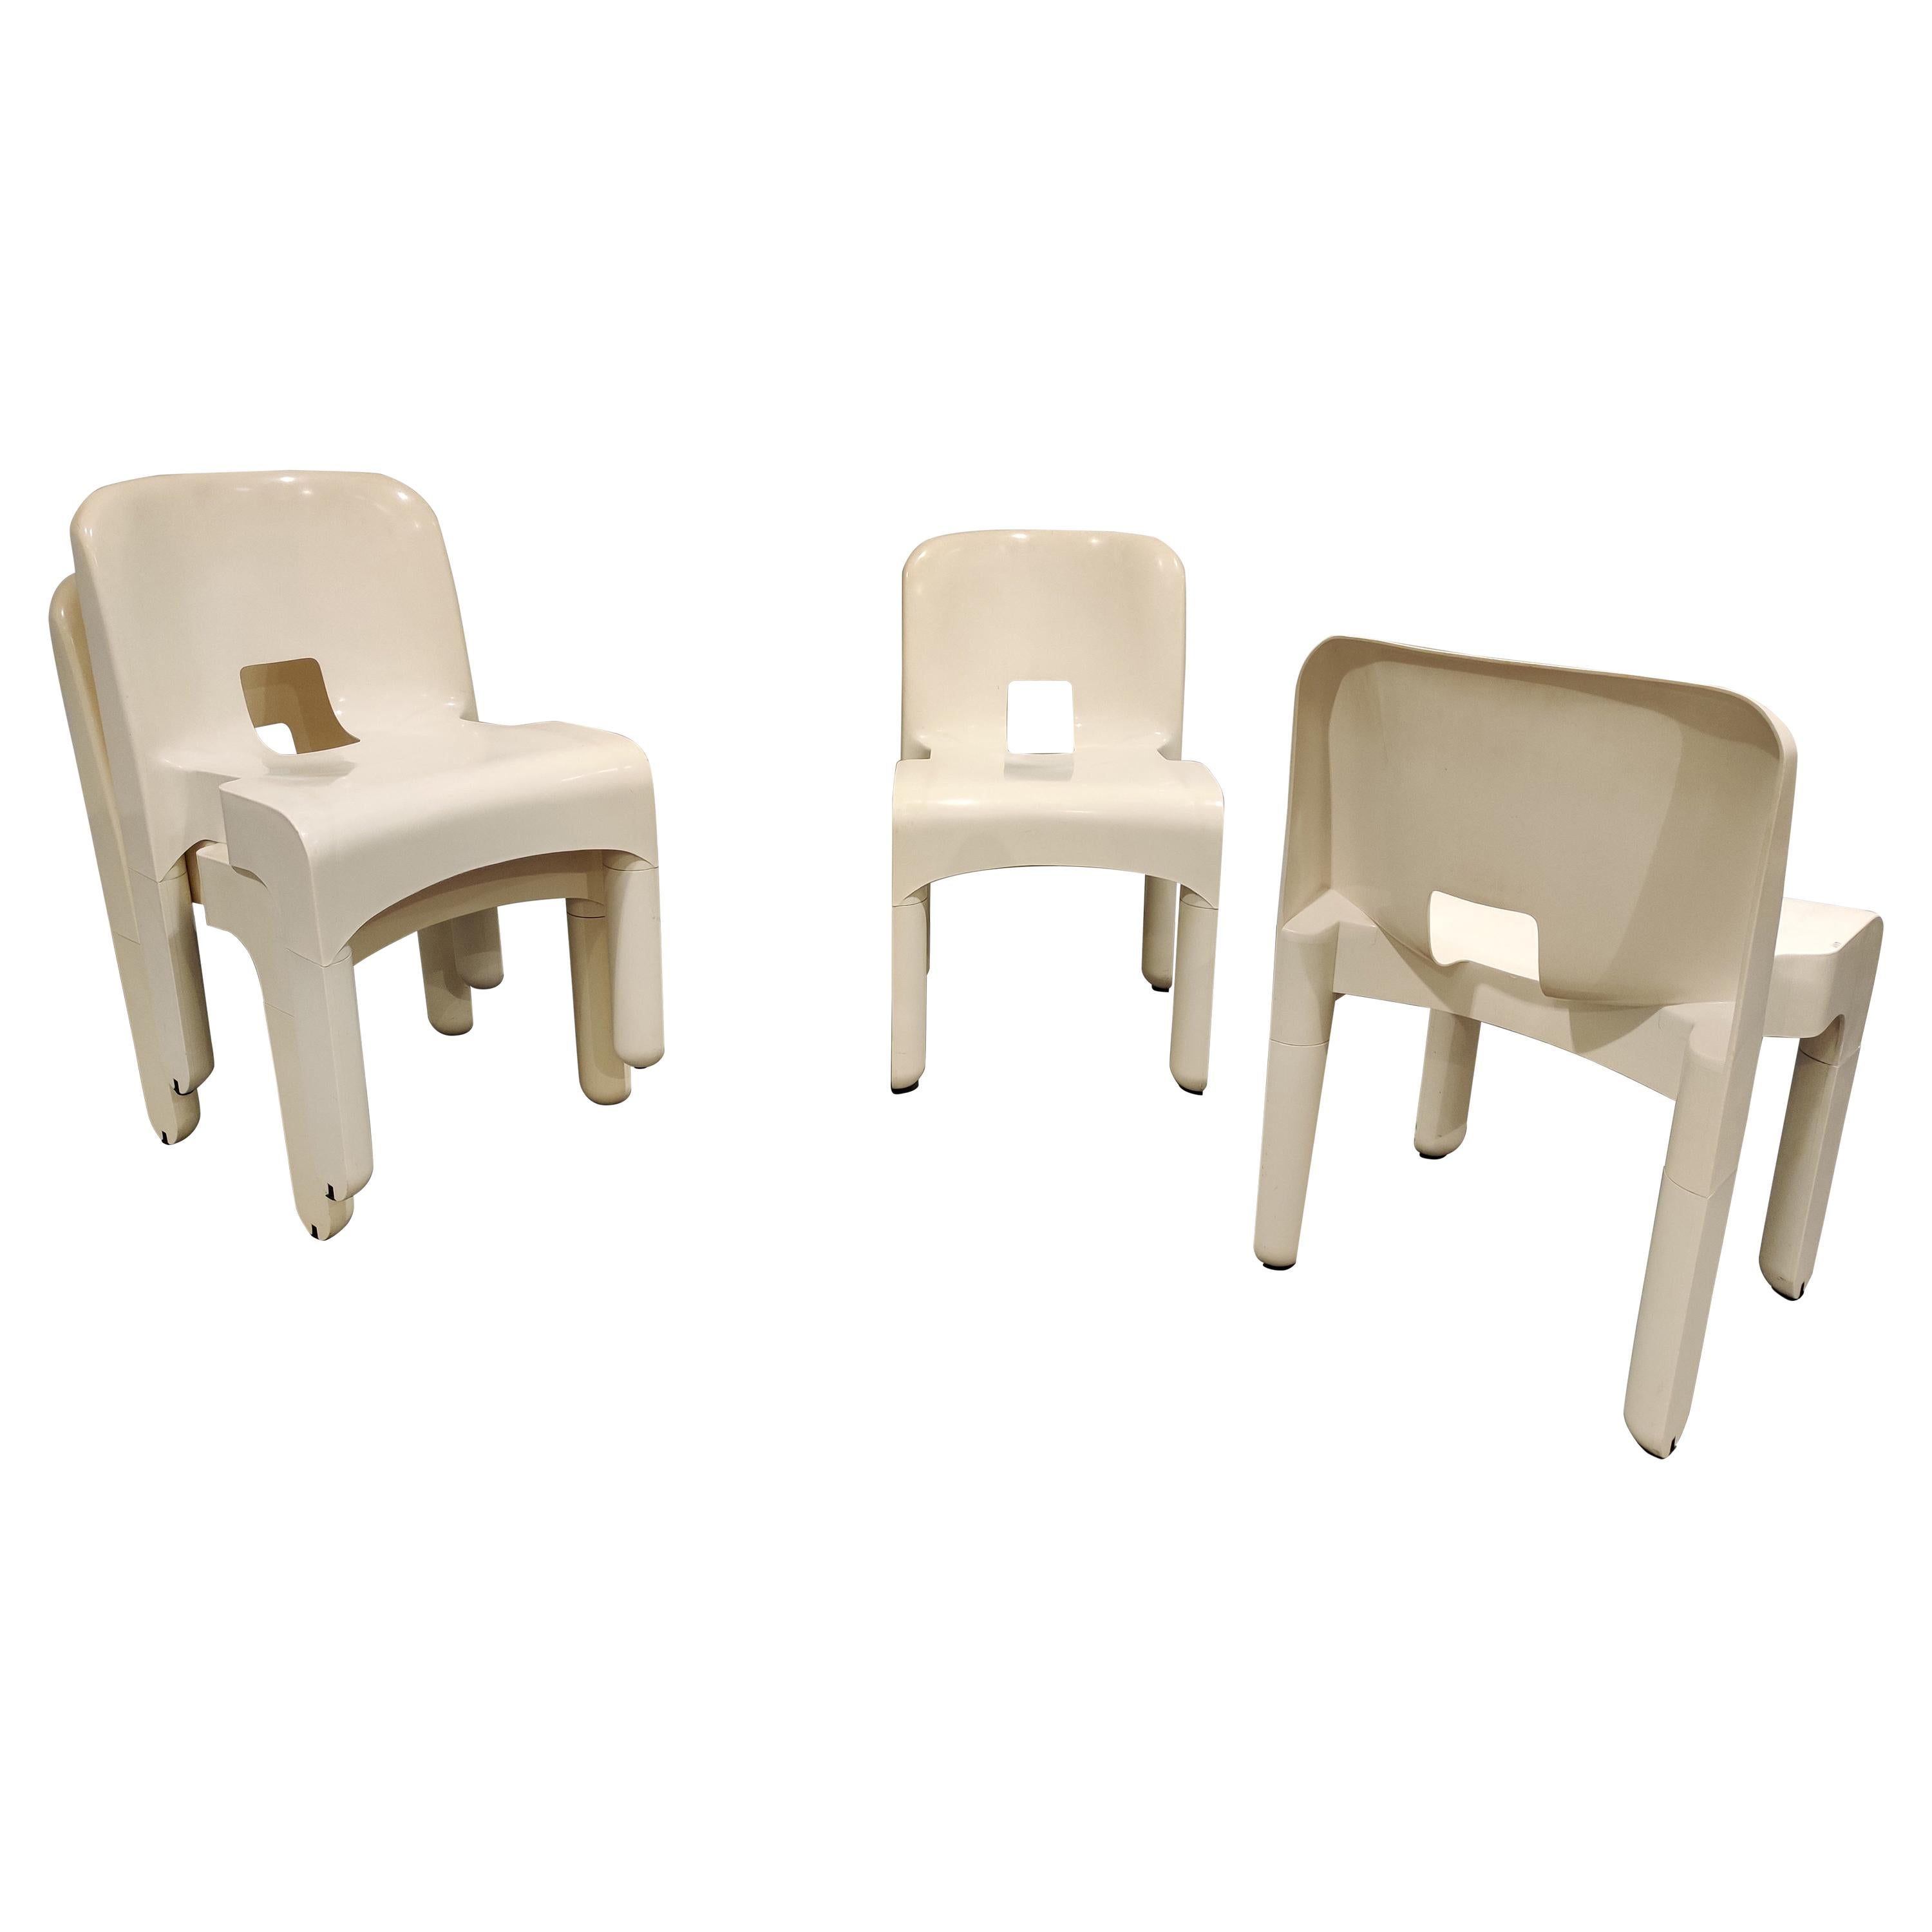 Universal Plastic Chairs Model 4869 by Joe Colombo for Kartell